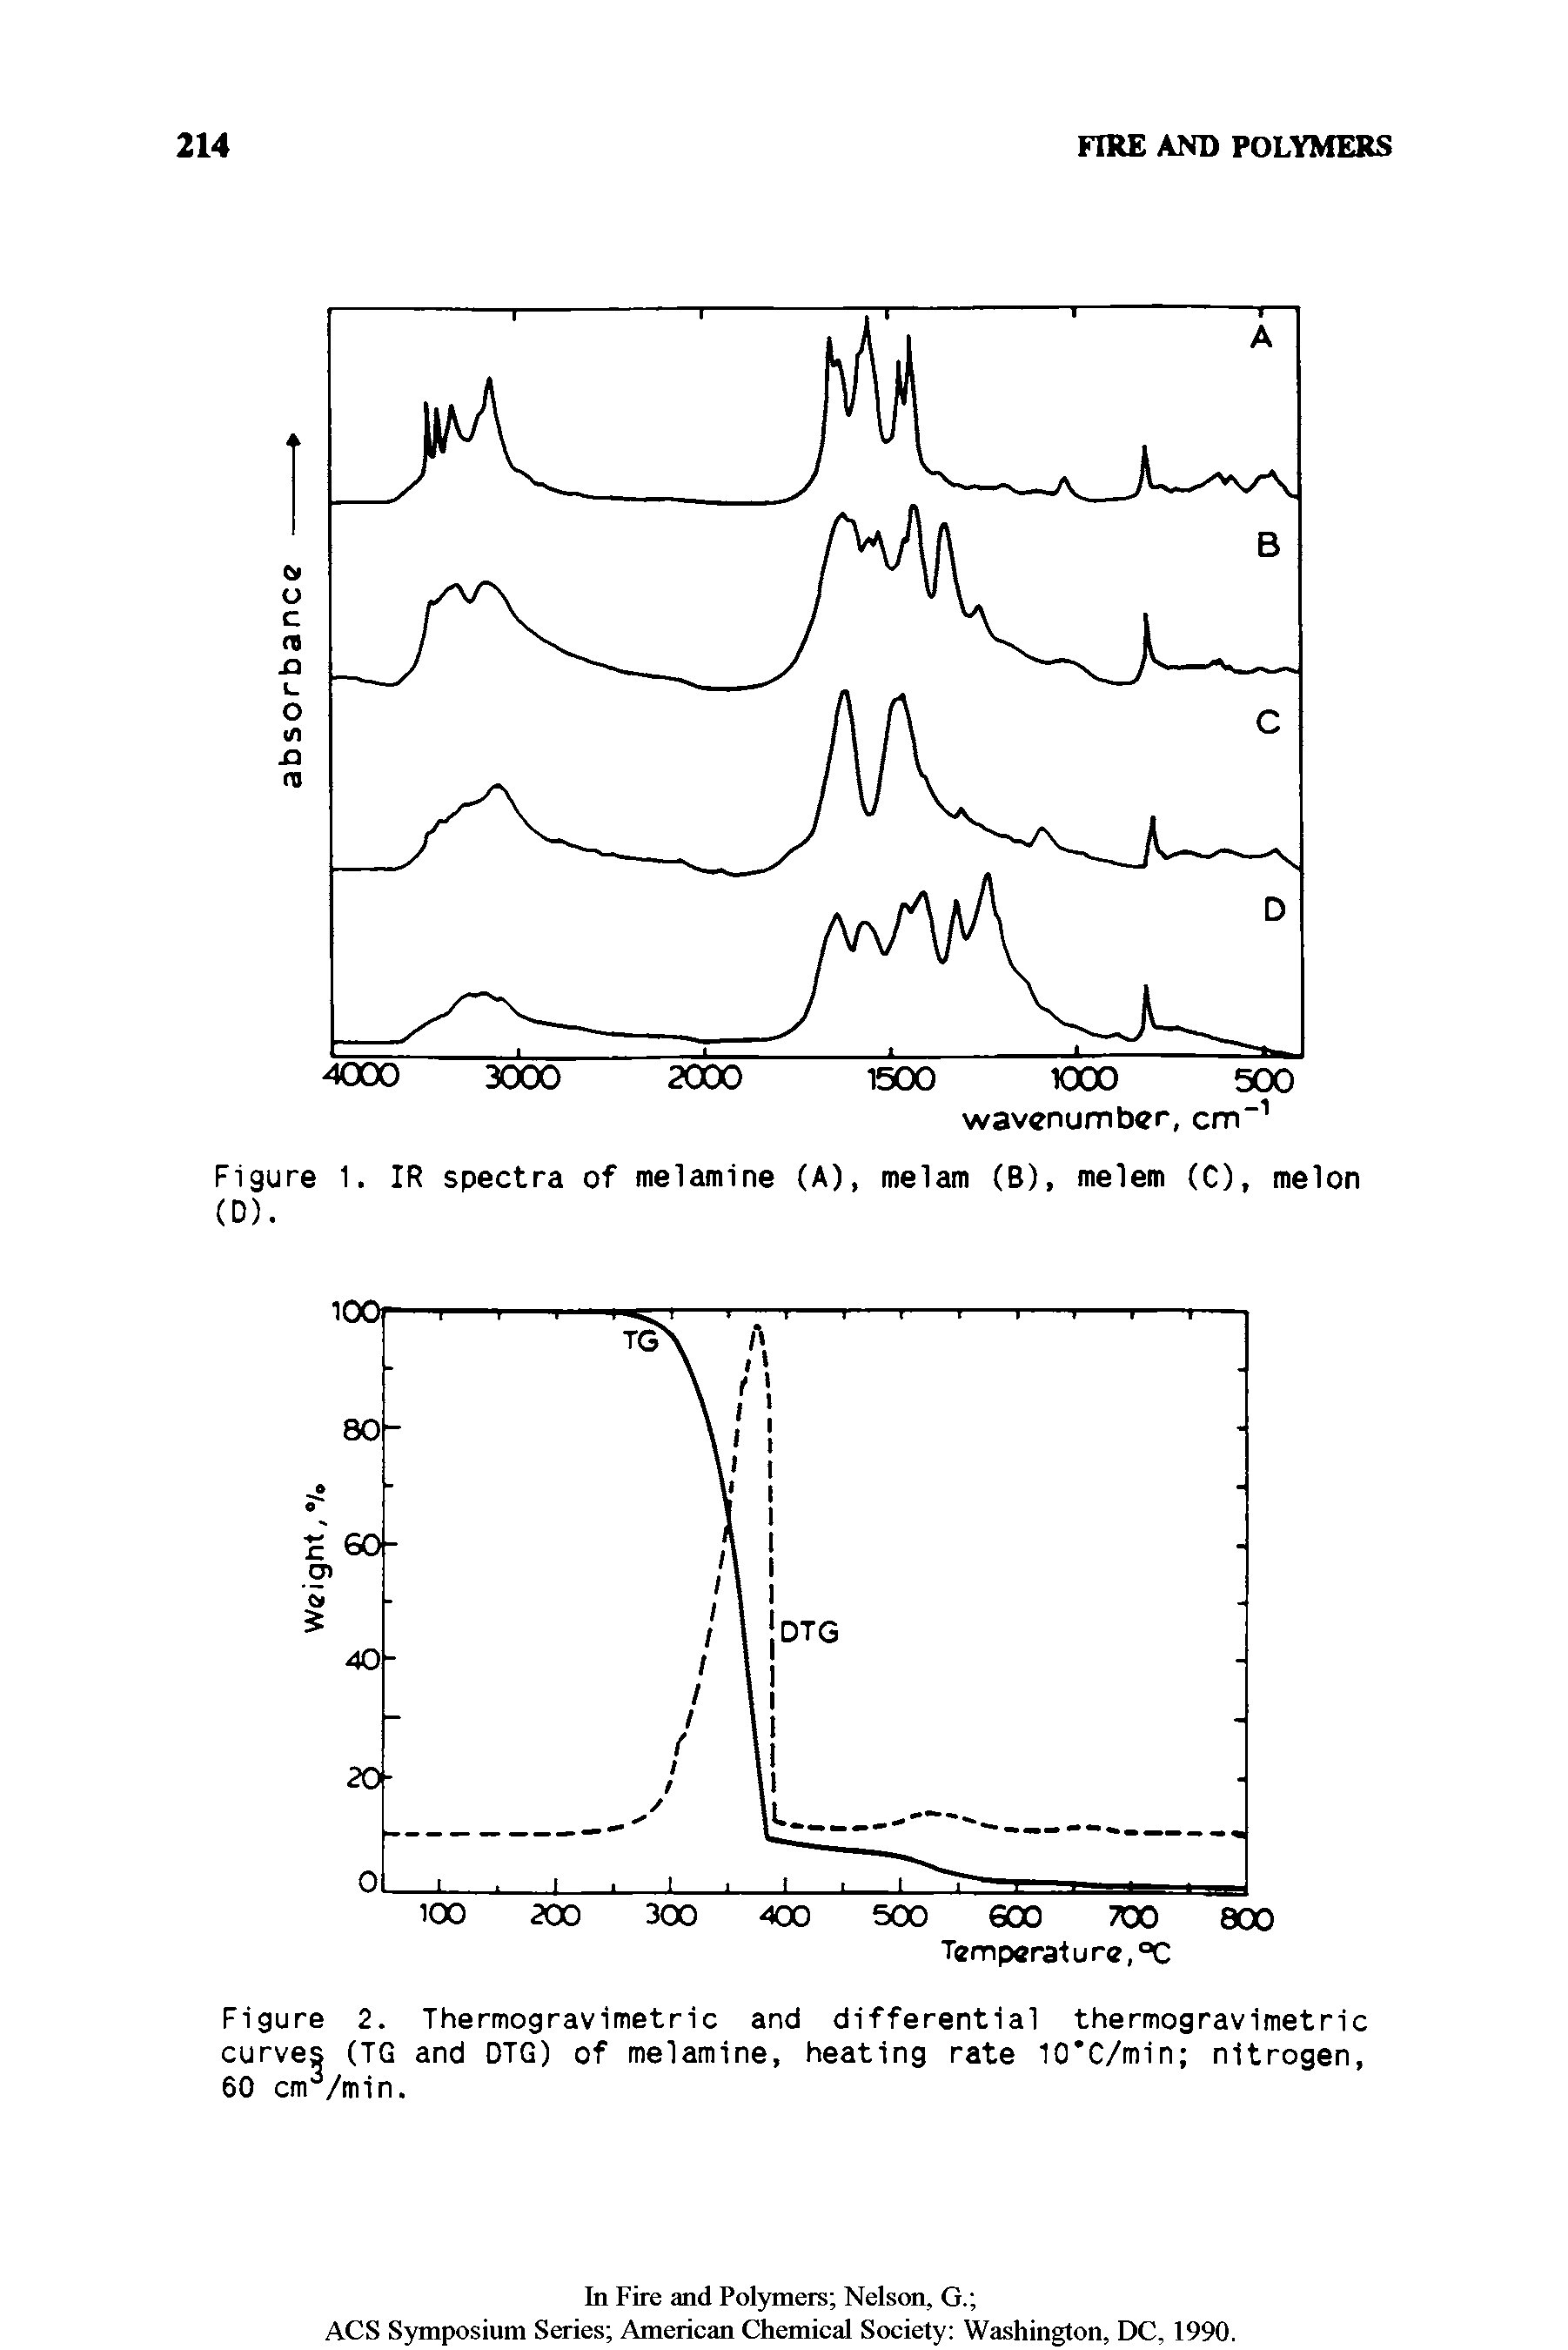 Figure 2. Thermogravimetric and differential thermogravimetric curves (TG and DTG) of melamine, heating rate 10 C/min nitrogen, 60 cm3/min.